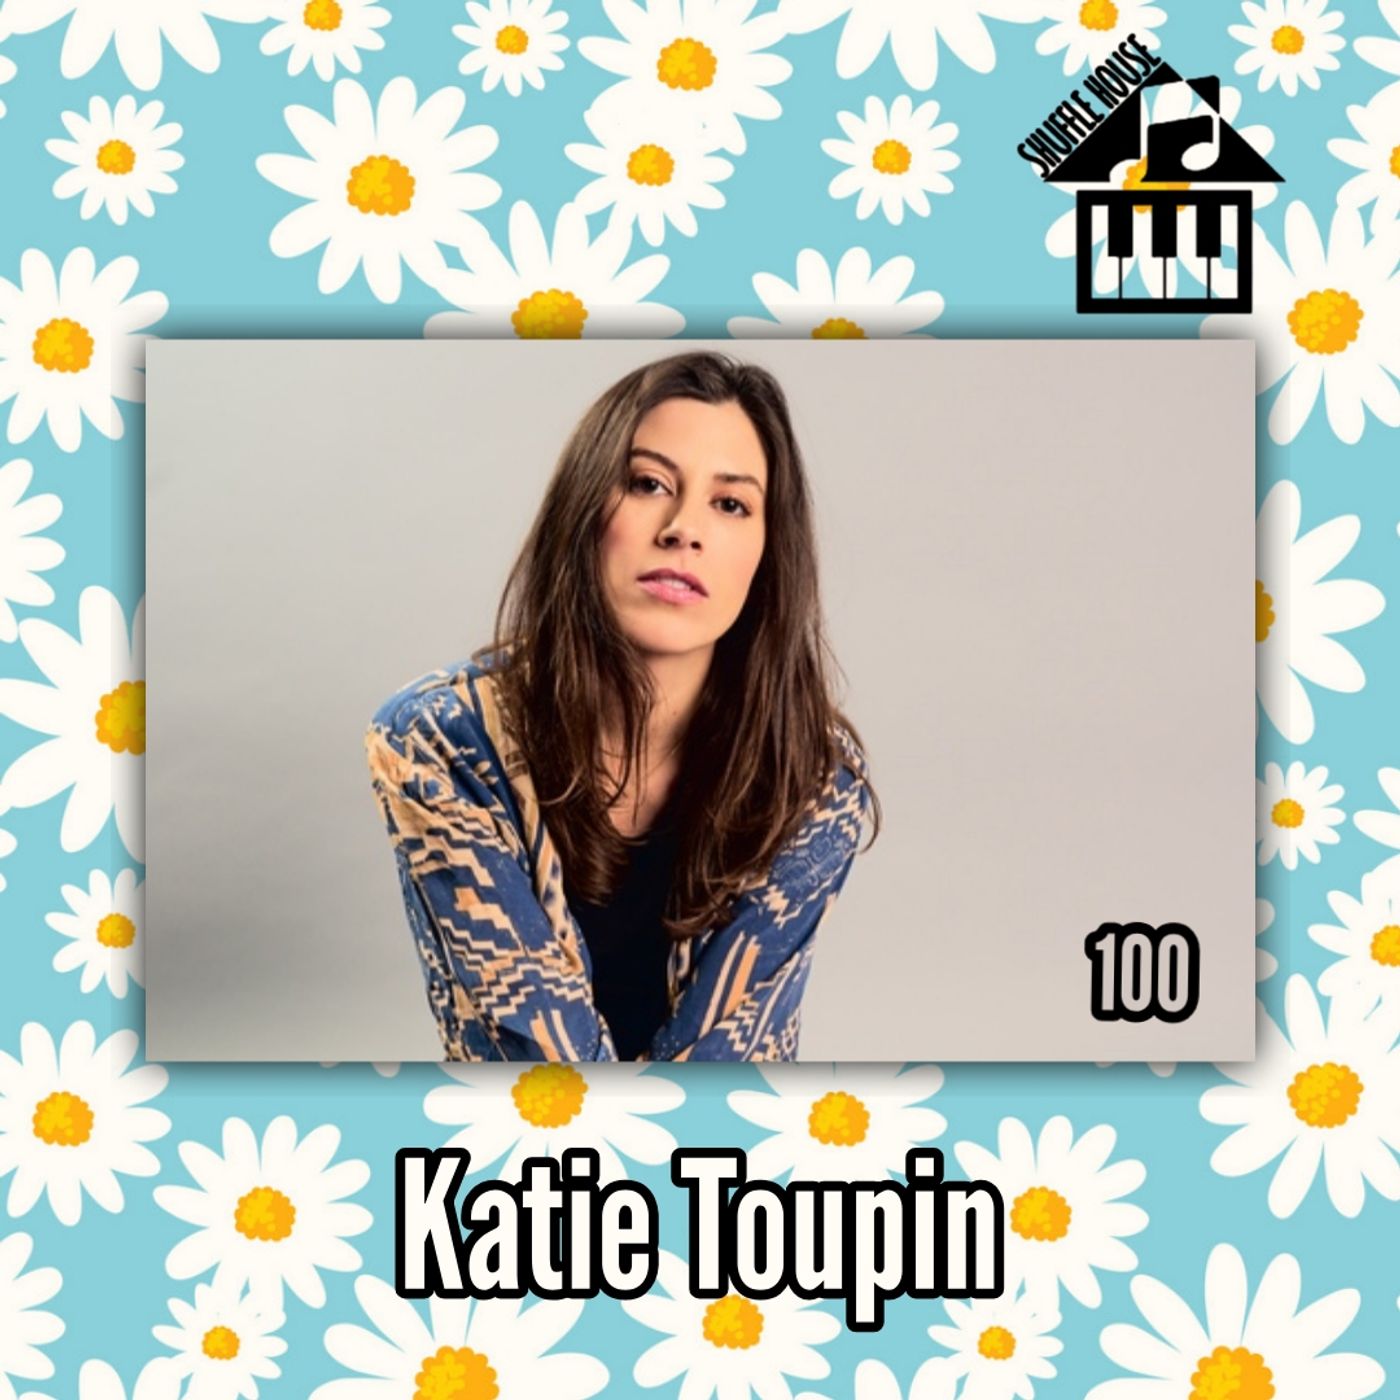 Get To Know - Katie Toupin